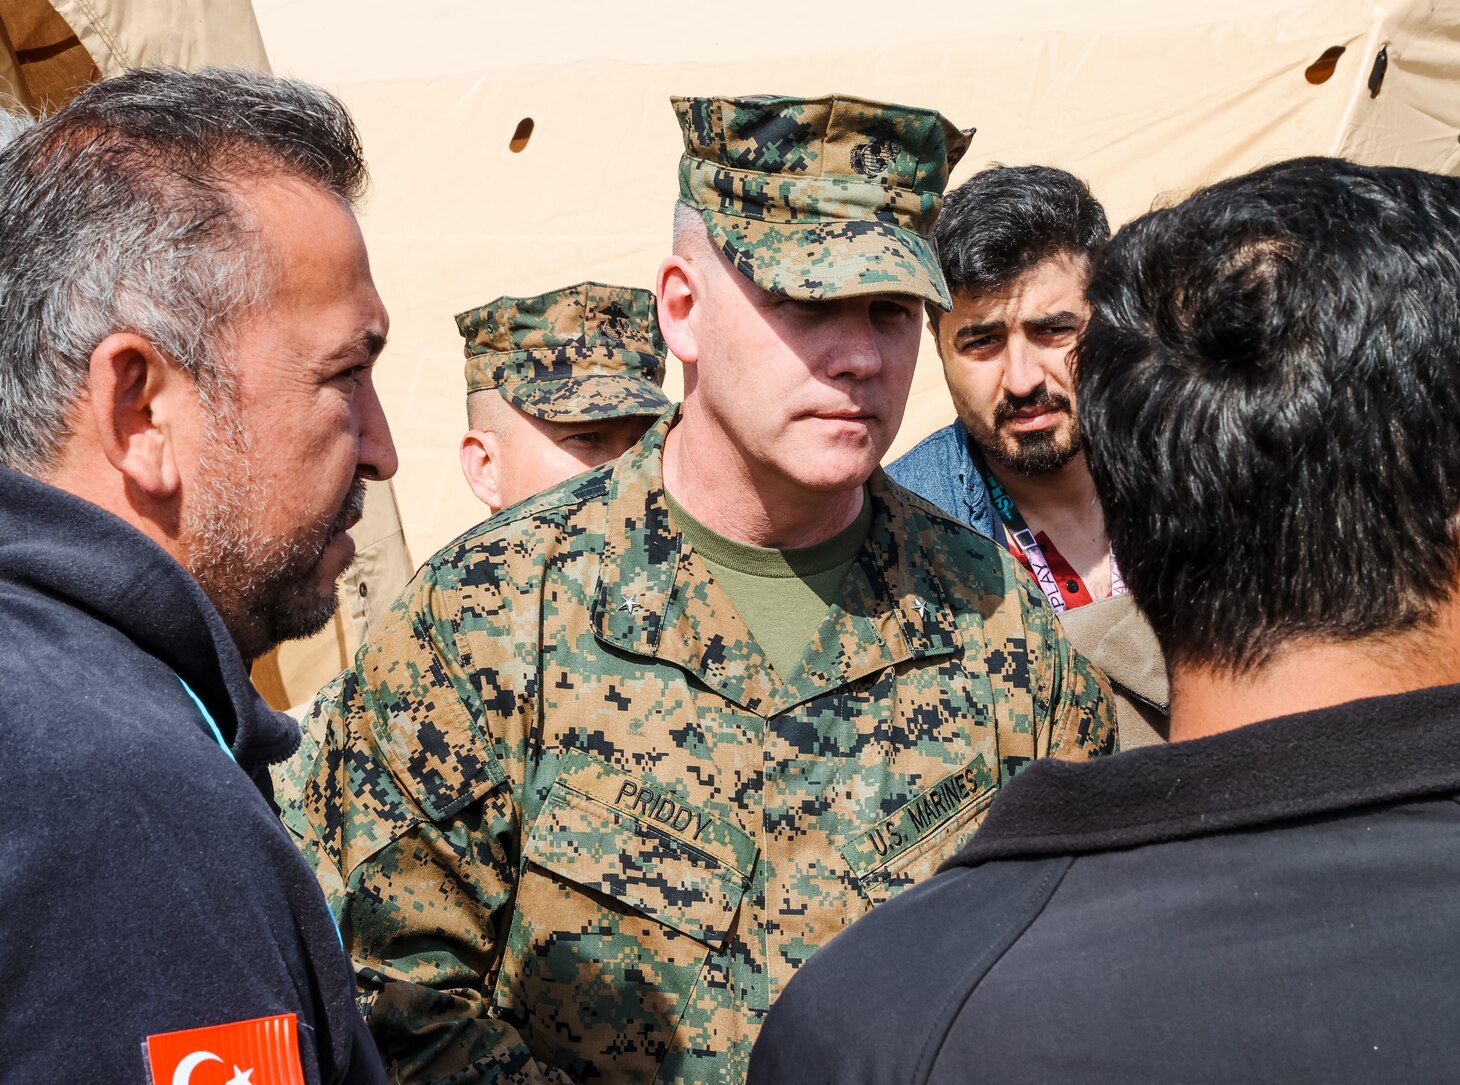 Brigadier Gen. Andrew T. Priddy, commanding general, Task Force 61/2 meets with members of the Turkish Ministry of Health, at Antakya, Türkiye, March 2, 2023. At the request of the Turkish government, U.S. military personnel assigned to Task Force 61/2 and 39th Air Base Wing were tasked with building a field hospital for the citizens who were affected by the Feb. 6 earthquakes. Upon completion of their efforts on March 2, 2023, leaders from Task Force 61/2 (TF 61/2), and 39th Air Base Wing conducted a final walk-through before the Turkish Ministry of Health began operations at the field hospital.